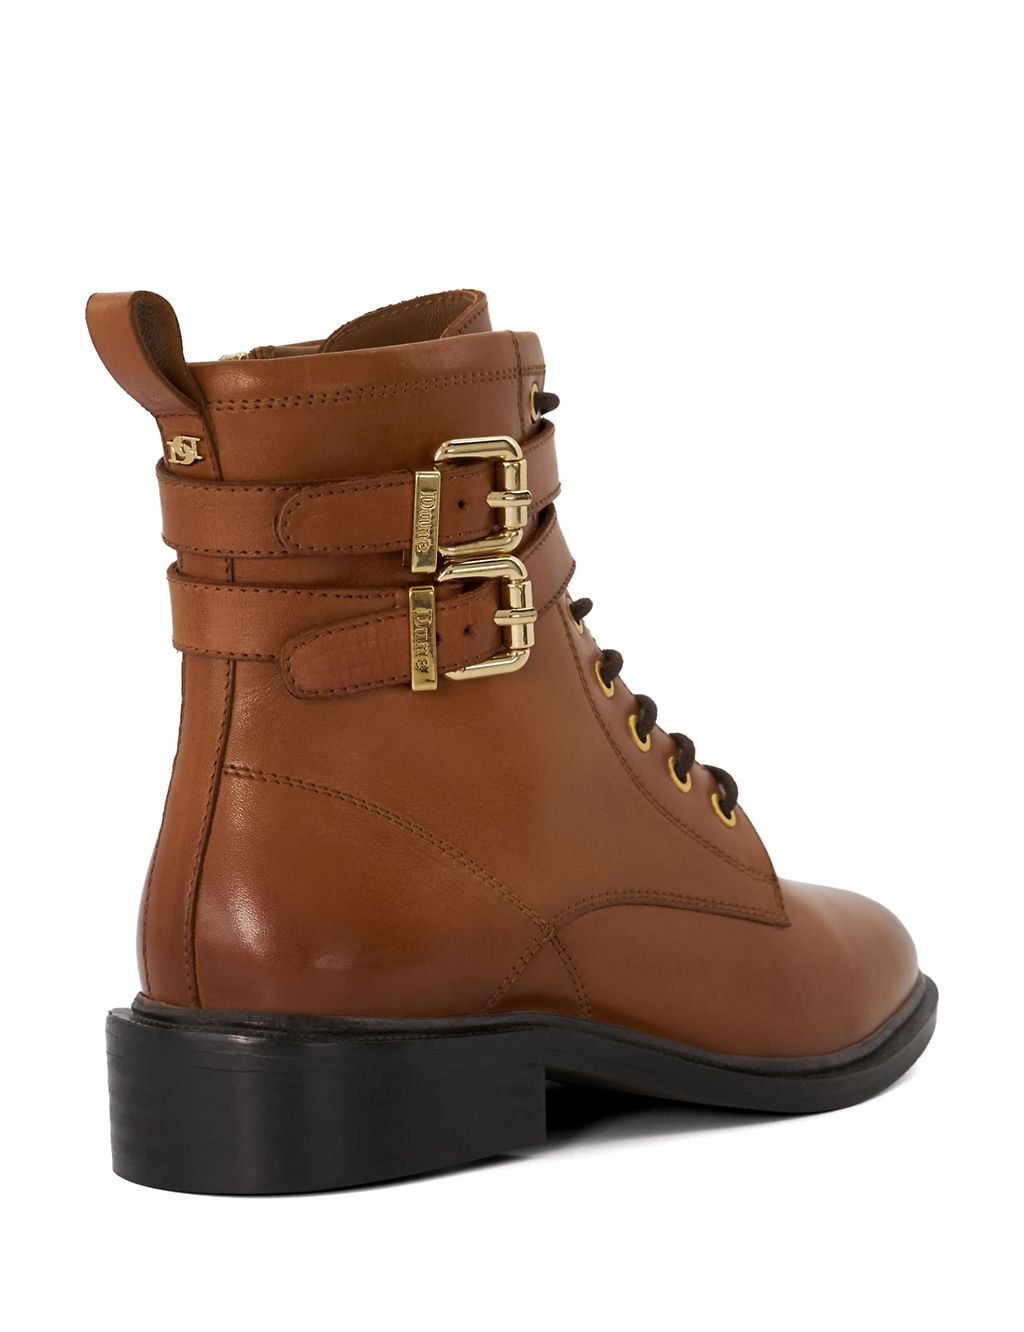 Leather Lace Up Buckle Flat Ankle Boots 2 of 4